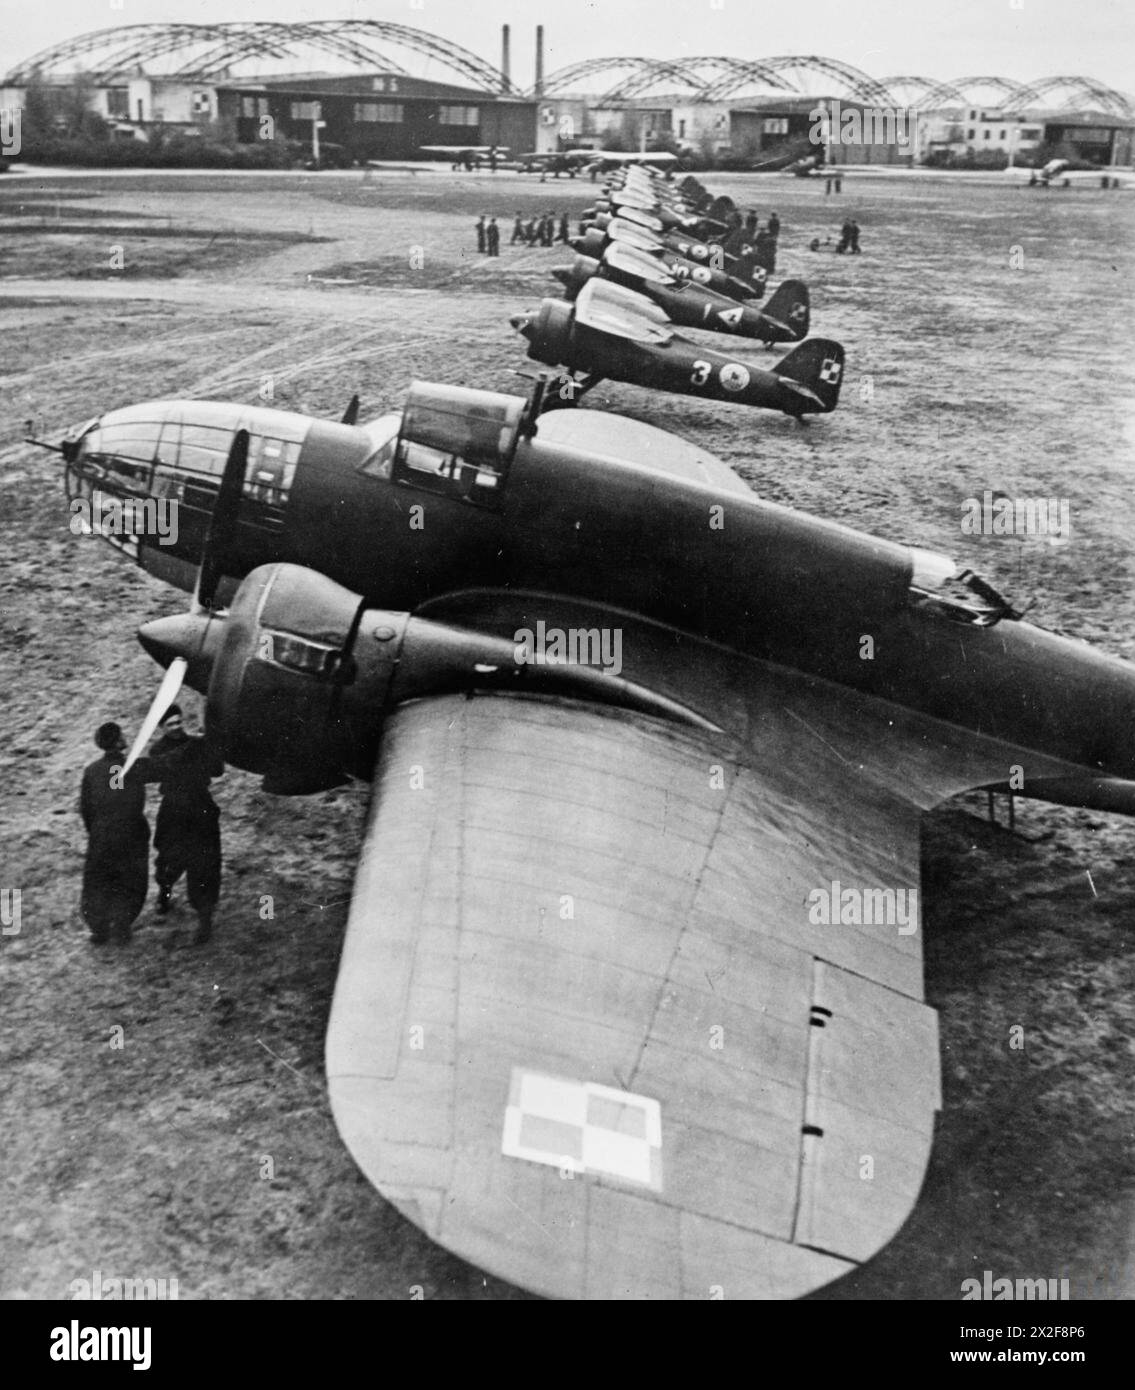 THE POLISH AIR FORCE IN THE INTERWAR PERIOD - A PZL.37 'Łoś' medium bomber of the 1st Air Regiment with a row of PZL P.11 fighter planes of the 111th and 112th Fighter Escadrilles in the background. Okęcie airfield near Warsaw, early 1939 Polish Air Force, Polish Air Force, 303 'Kościuszko' Fighter Squadron, Polish Air Force, 315 'City of Dęblin' Fighter Squadron Stock Photo